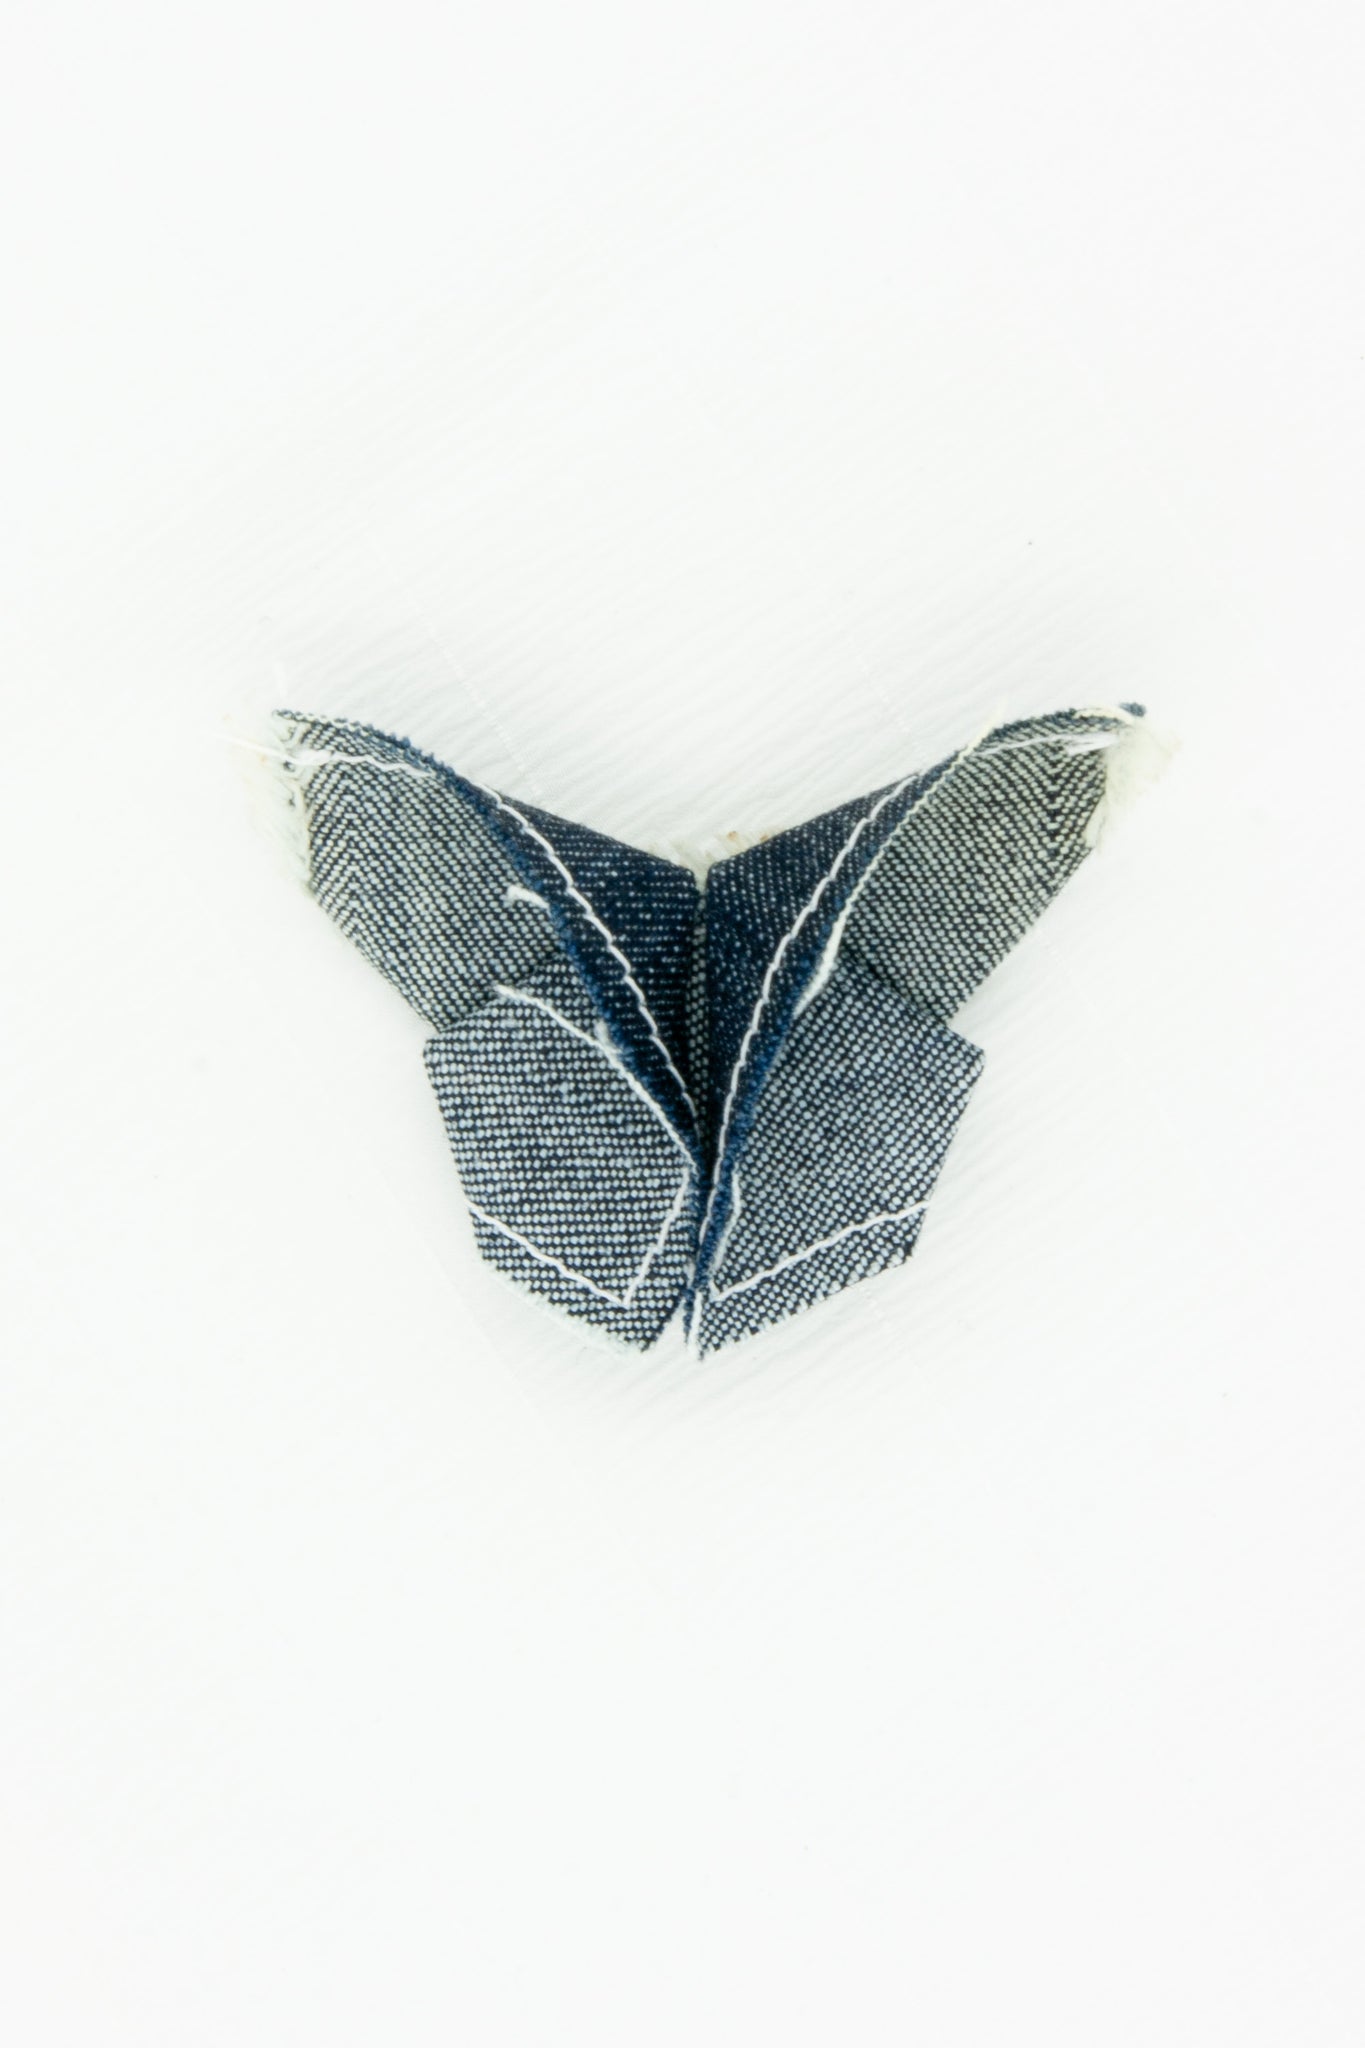 Butterfly Brooch in Light Indigo Denim with Contrast Stitching